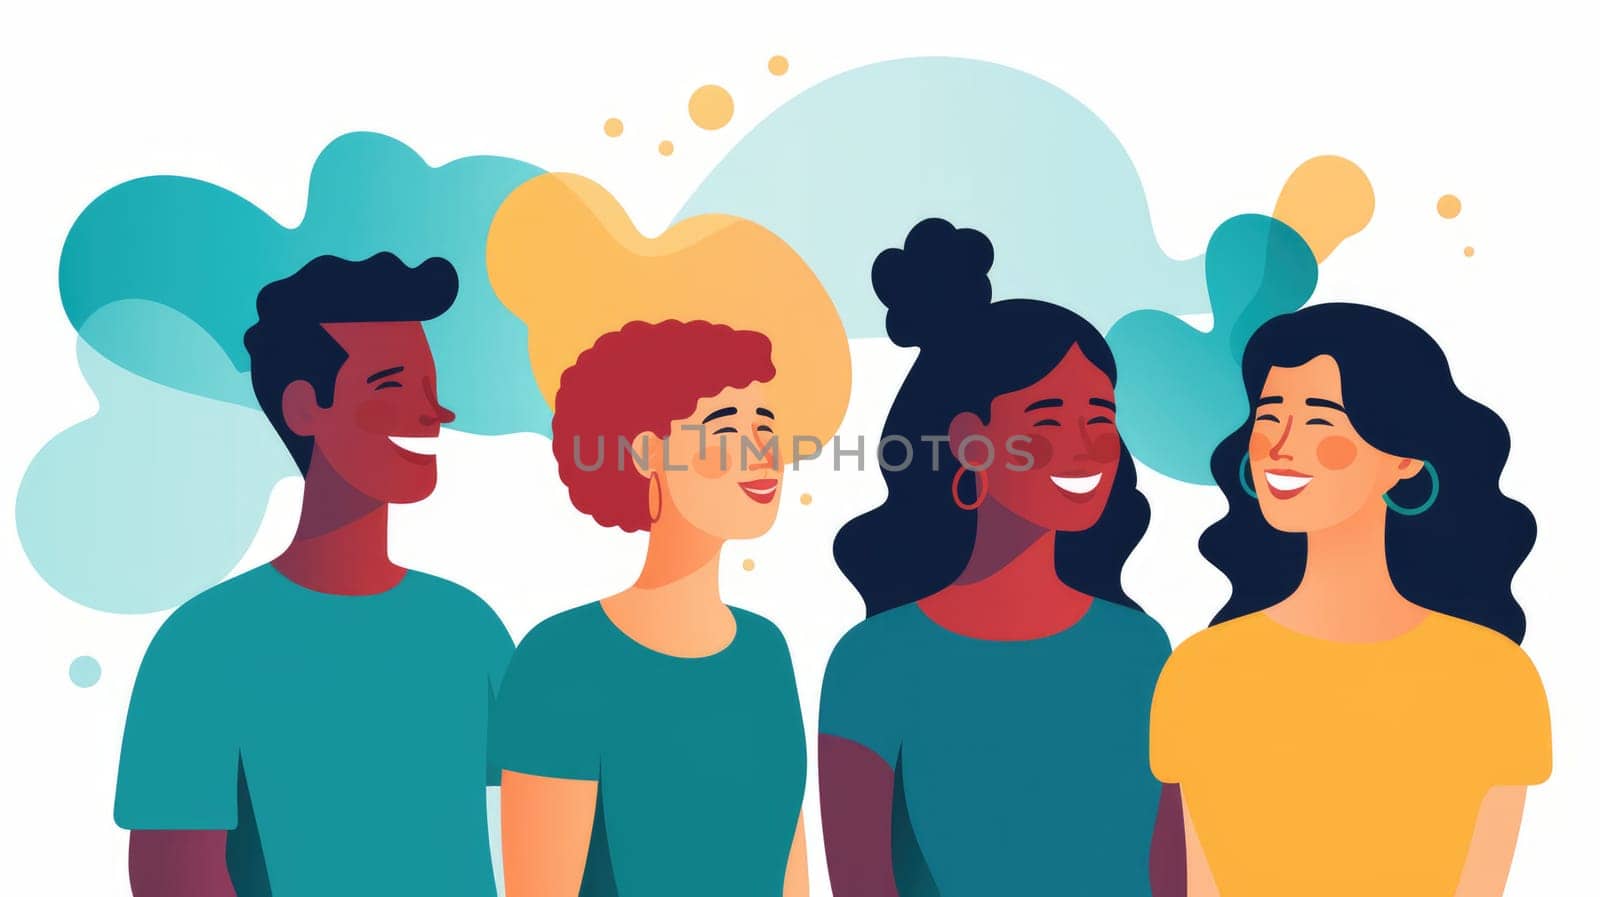 Positive affirmations cartoon illustration - AI generated. People, woman, man, smiling, colorful.